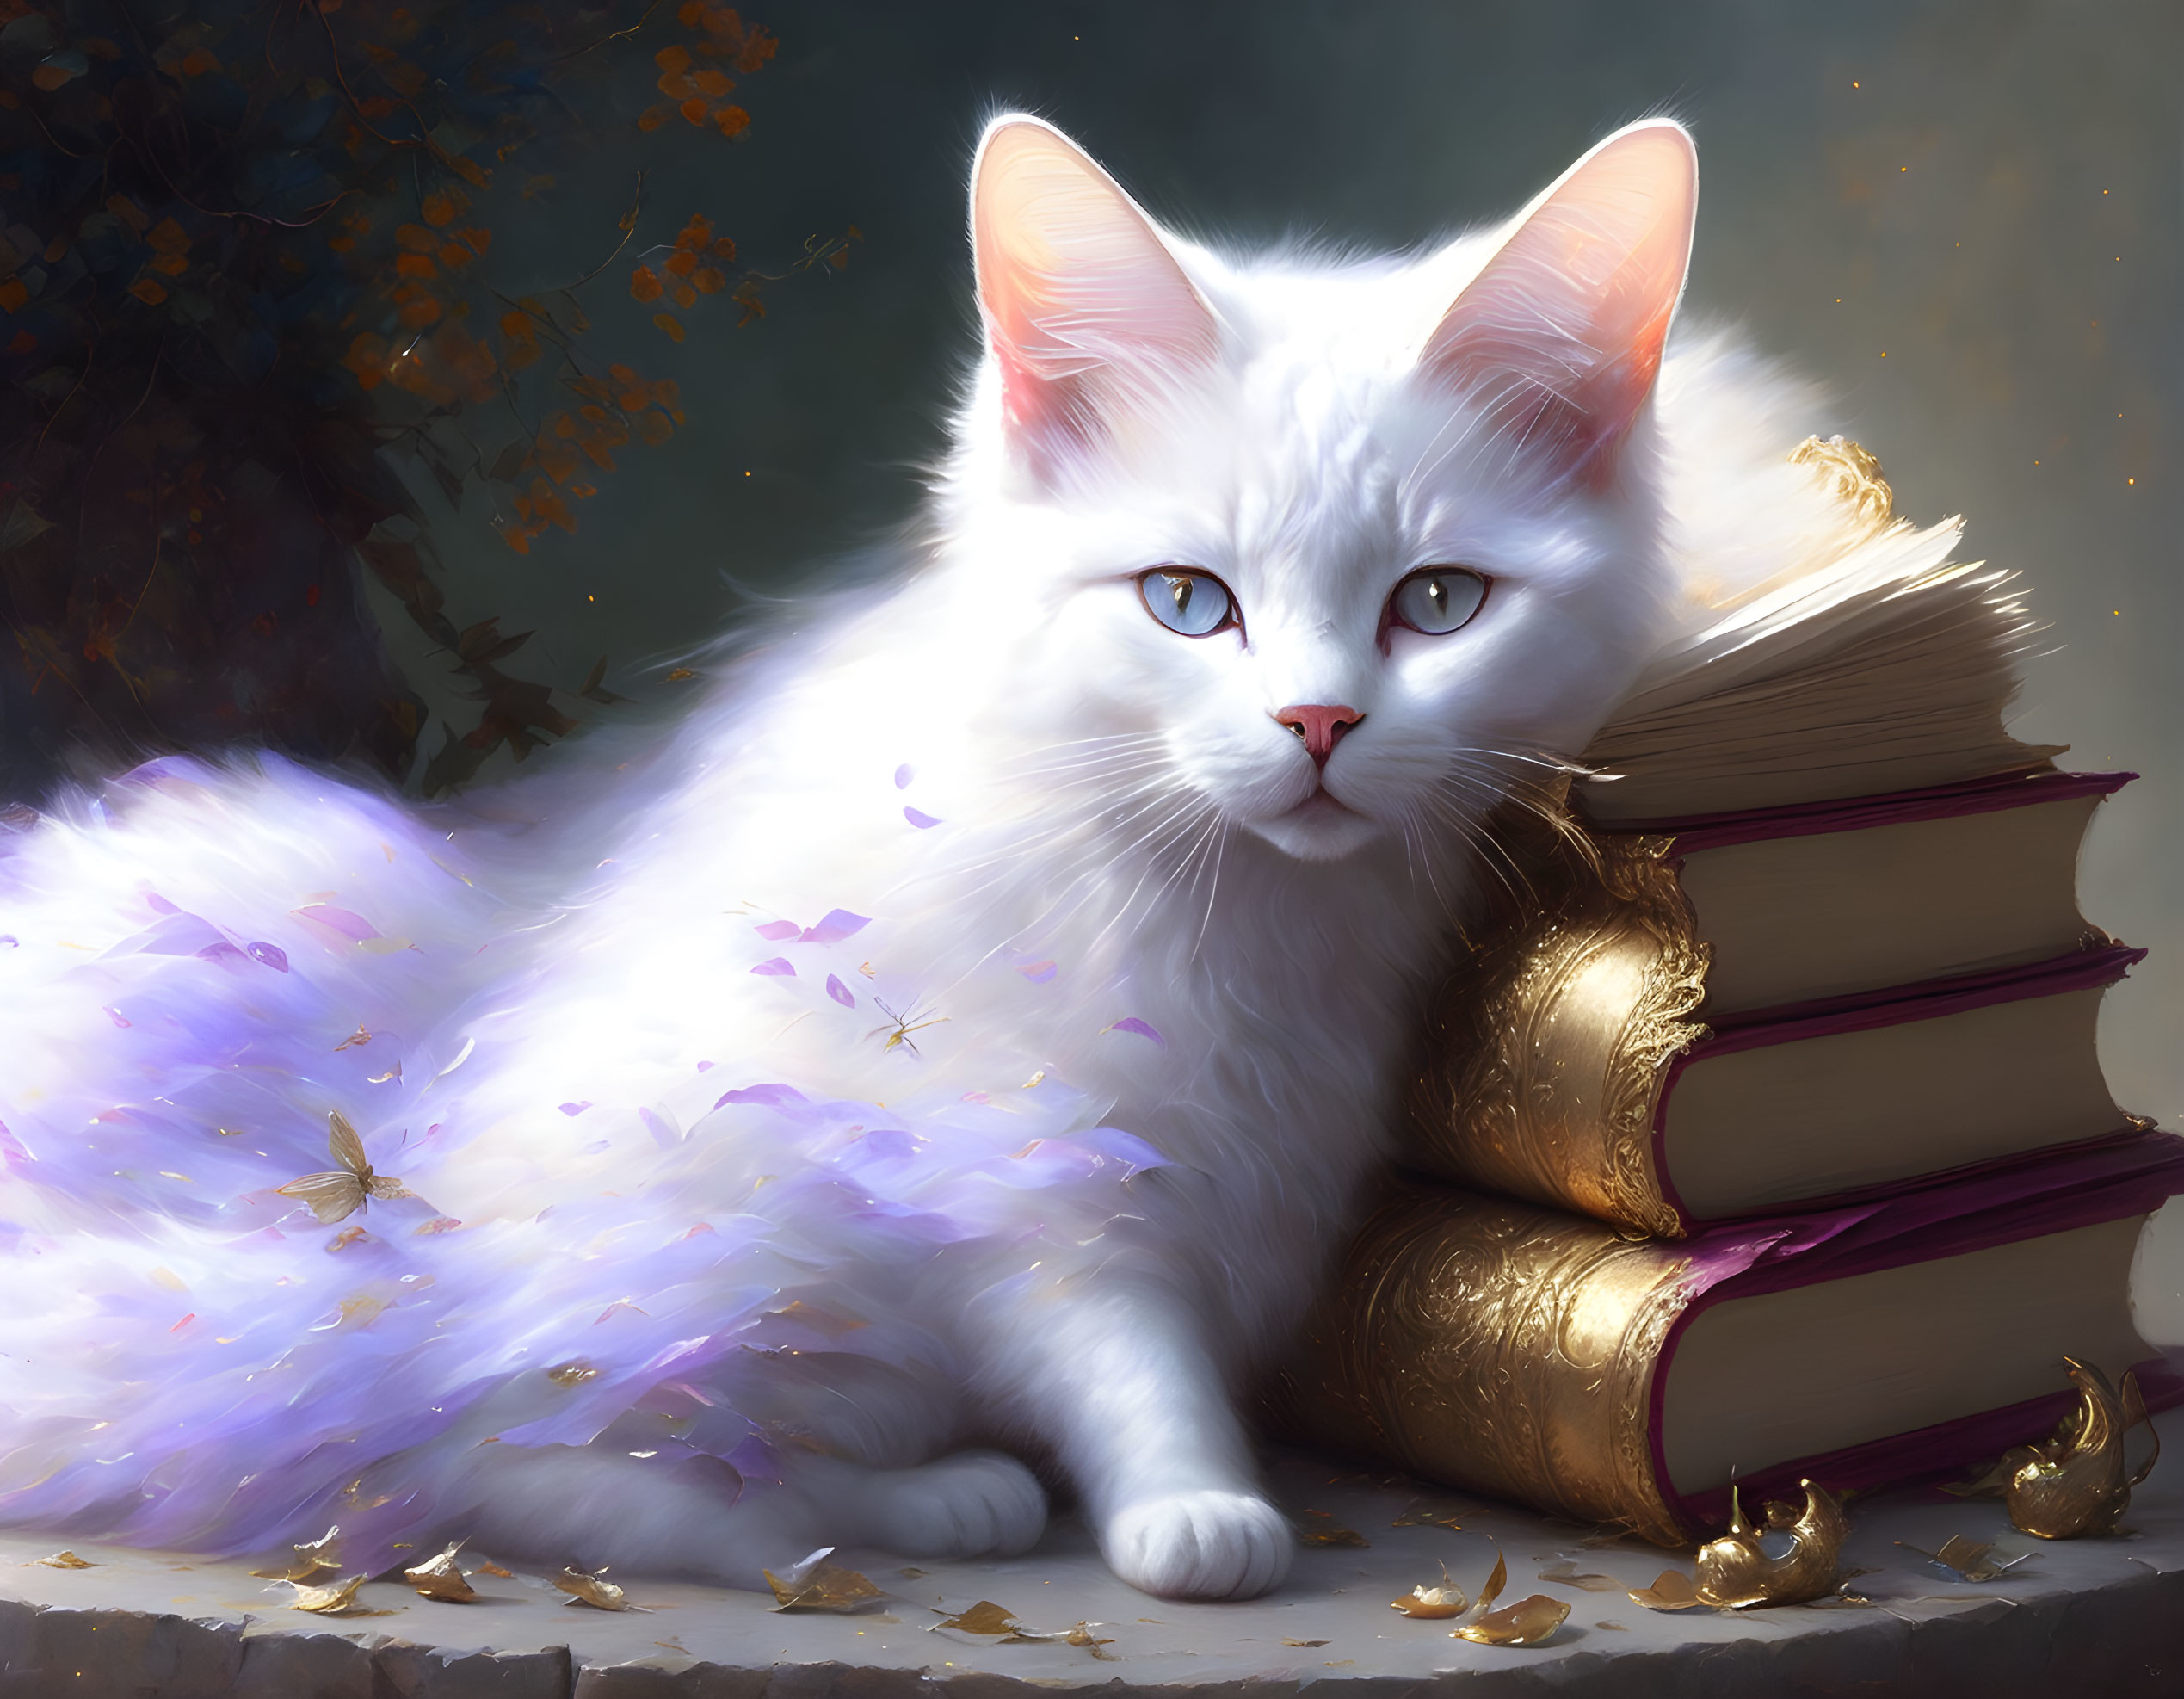 Fluffy White Cat with Blue Eyes Resting by Stack of Gold-Bound Books